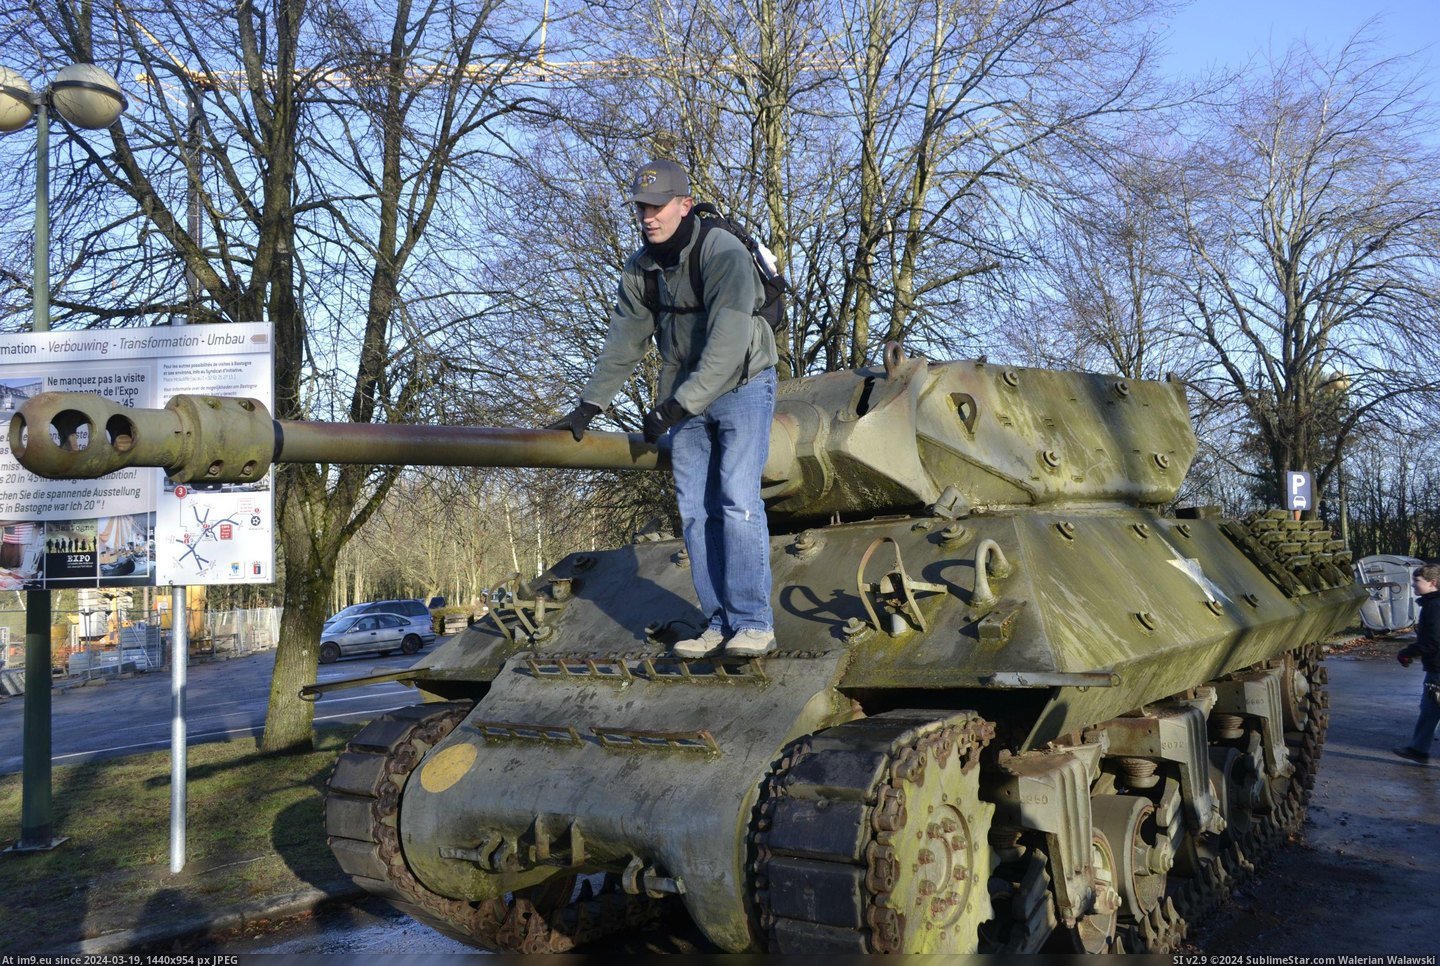 #Years #Ago #Bulge #Bastogne #Foxholes #Couple #Battle [Pics] Battle of the Bulge started today in 1944. Went to Bastogne a couple years ago and took pictures. The foxholes of the 101 Pic. (Изображение из альбом My r/PICS favs))